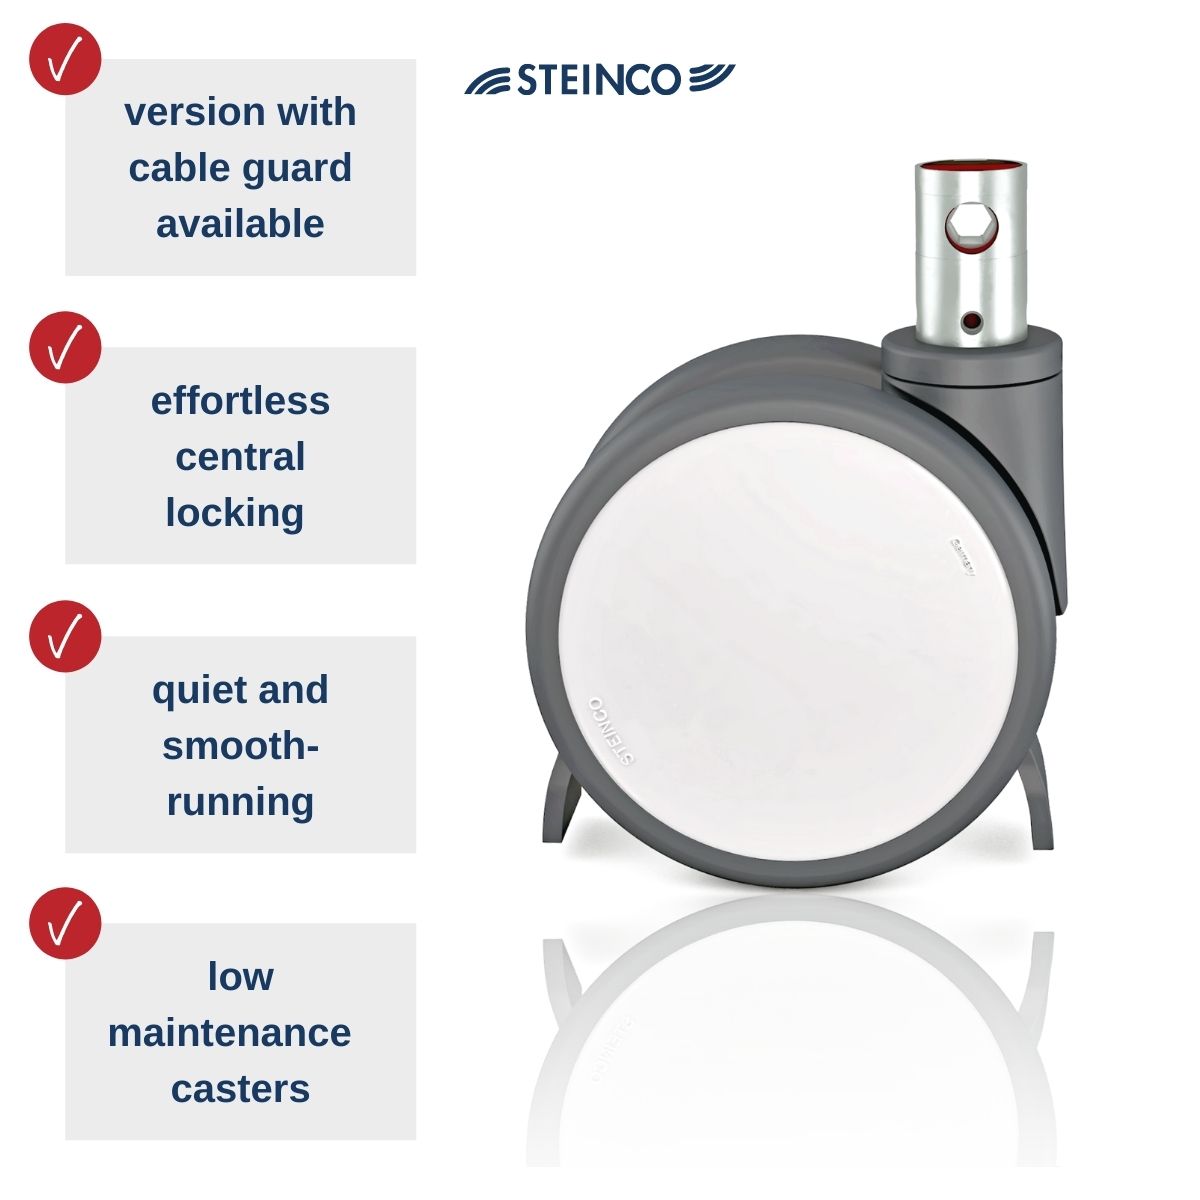 STEINCO medical casters and wheels with cable guard (deflector), quiet and smooth running, low maintenance castors